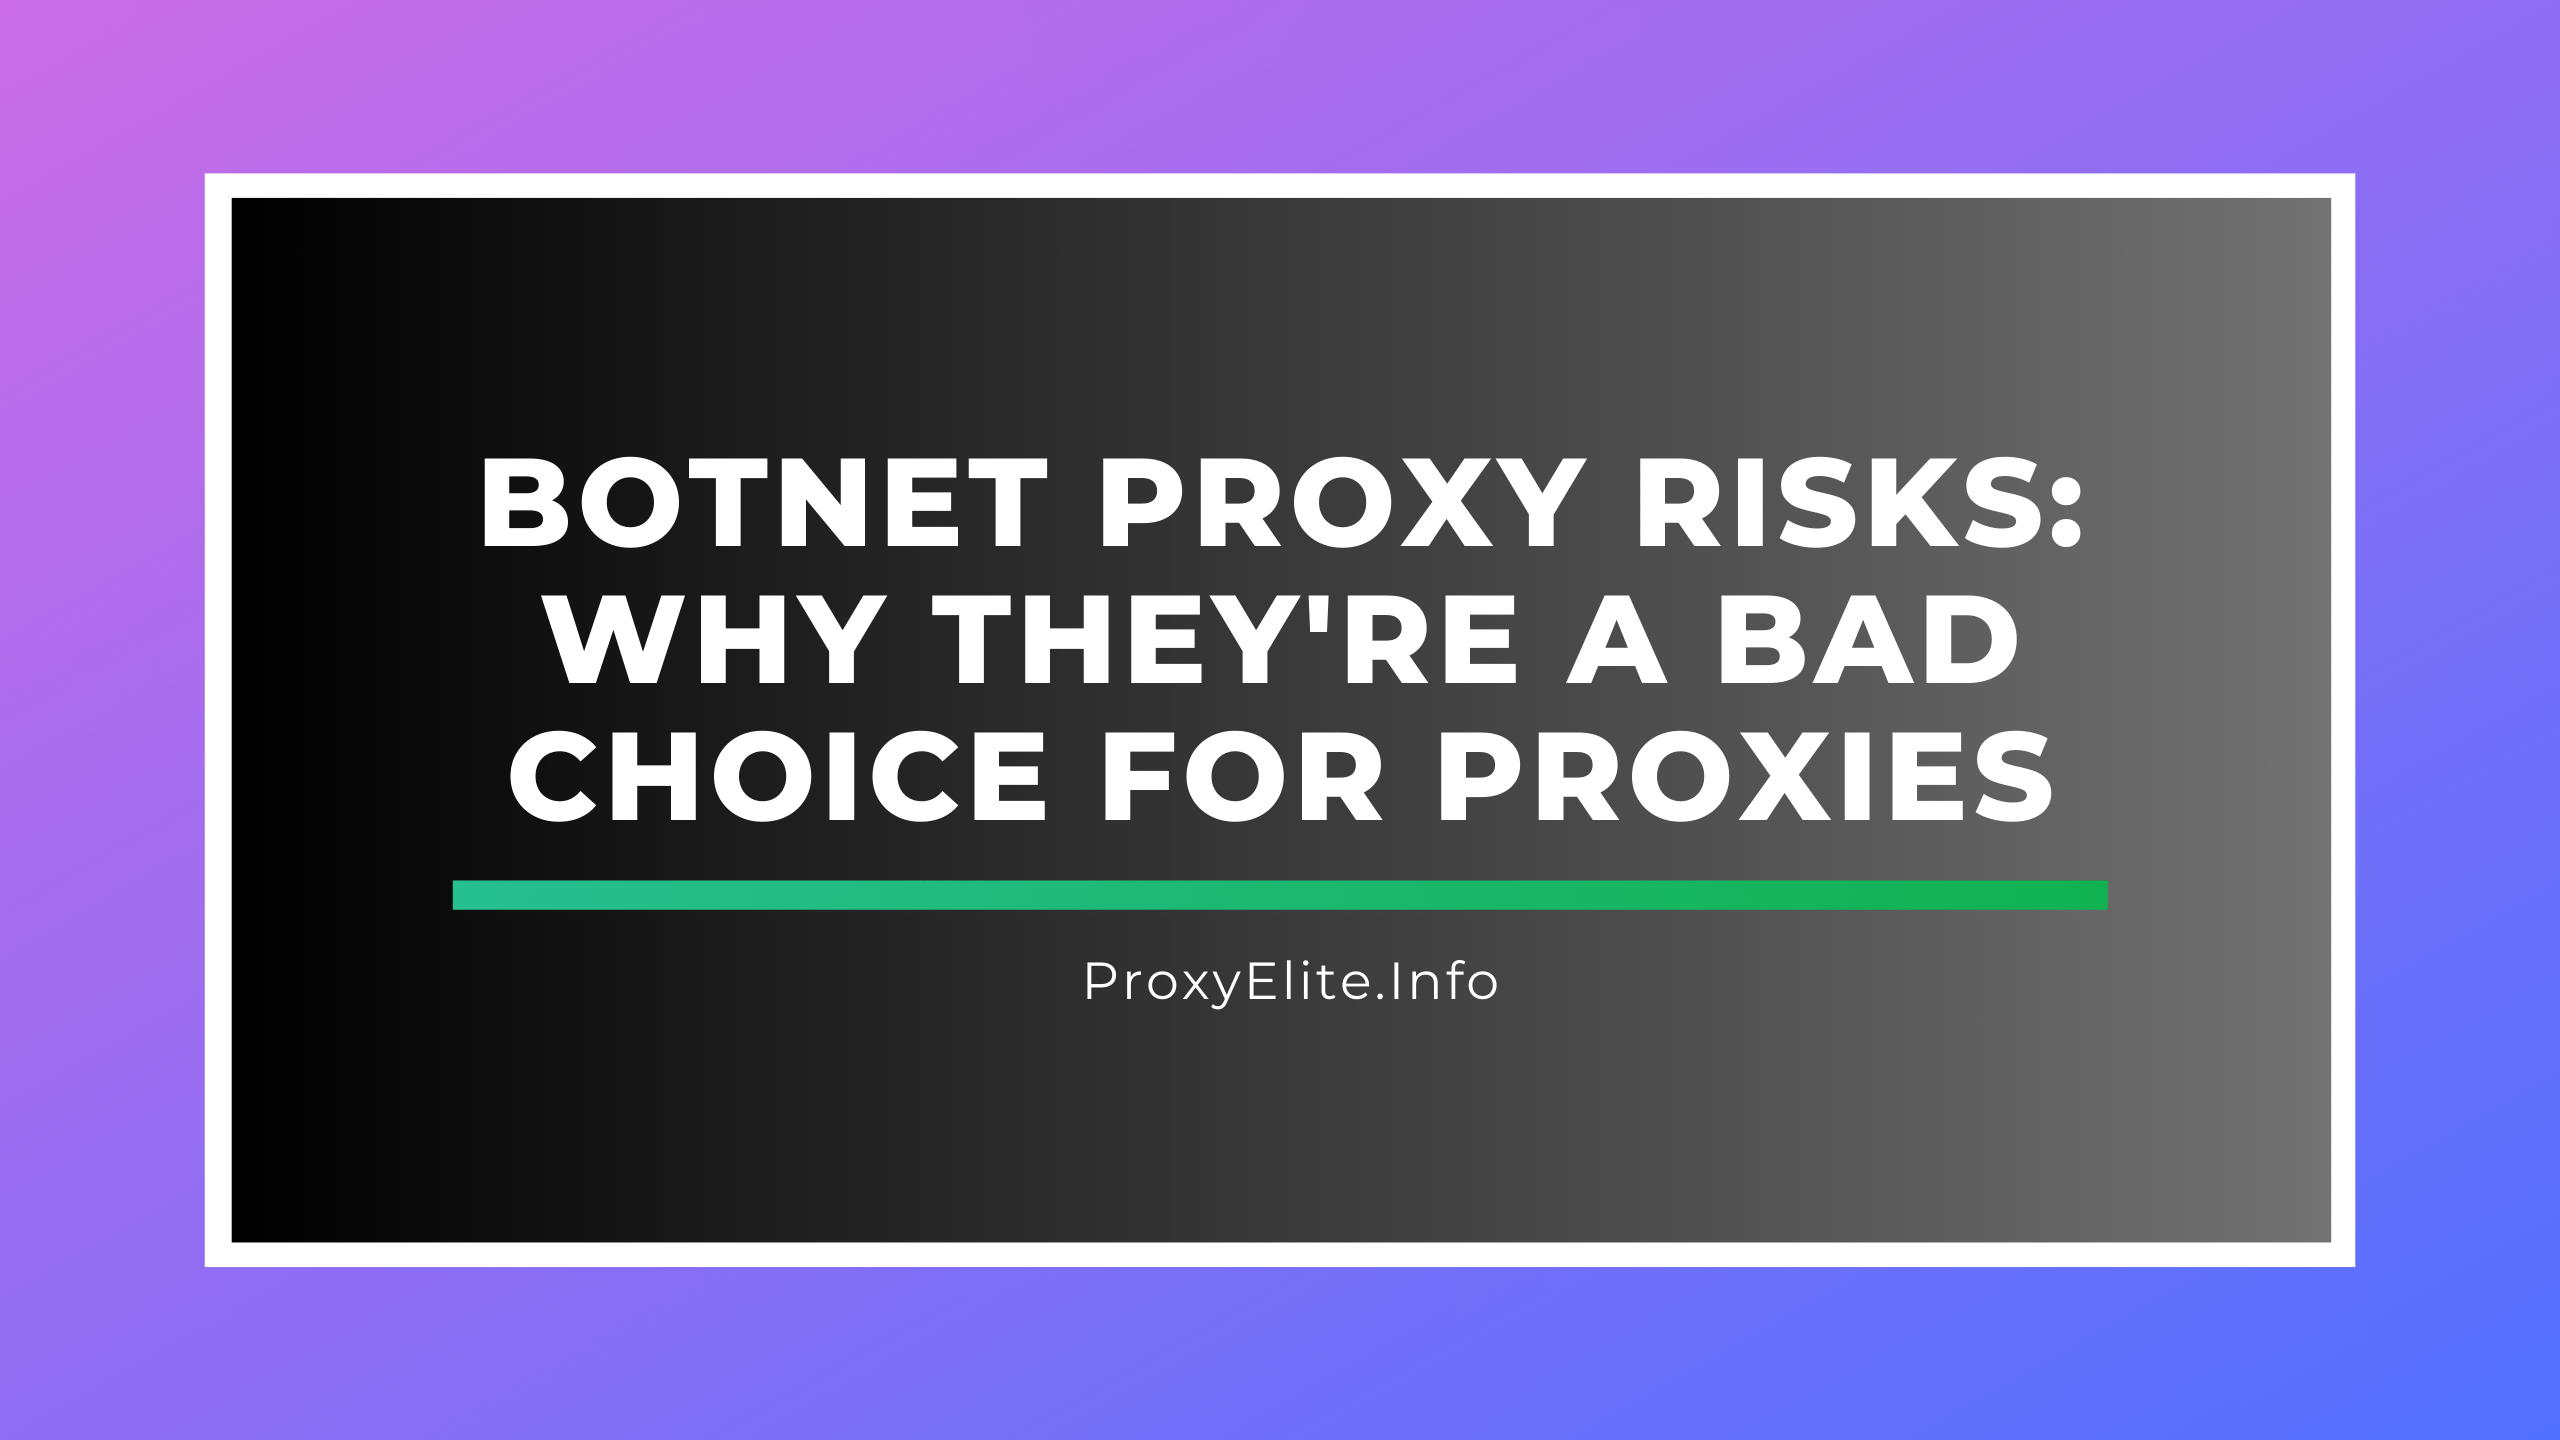 Botnet Proxy Risks: Why They’re a Bad Choice for Proxies